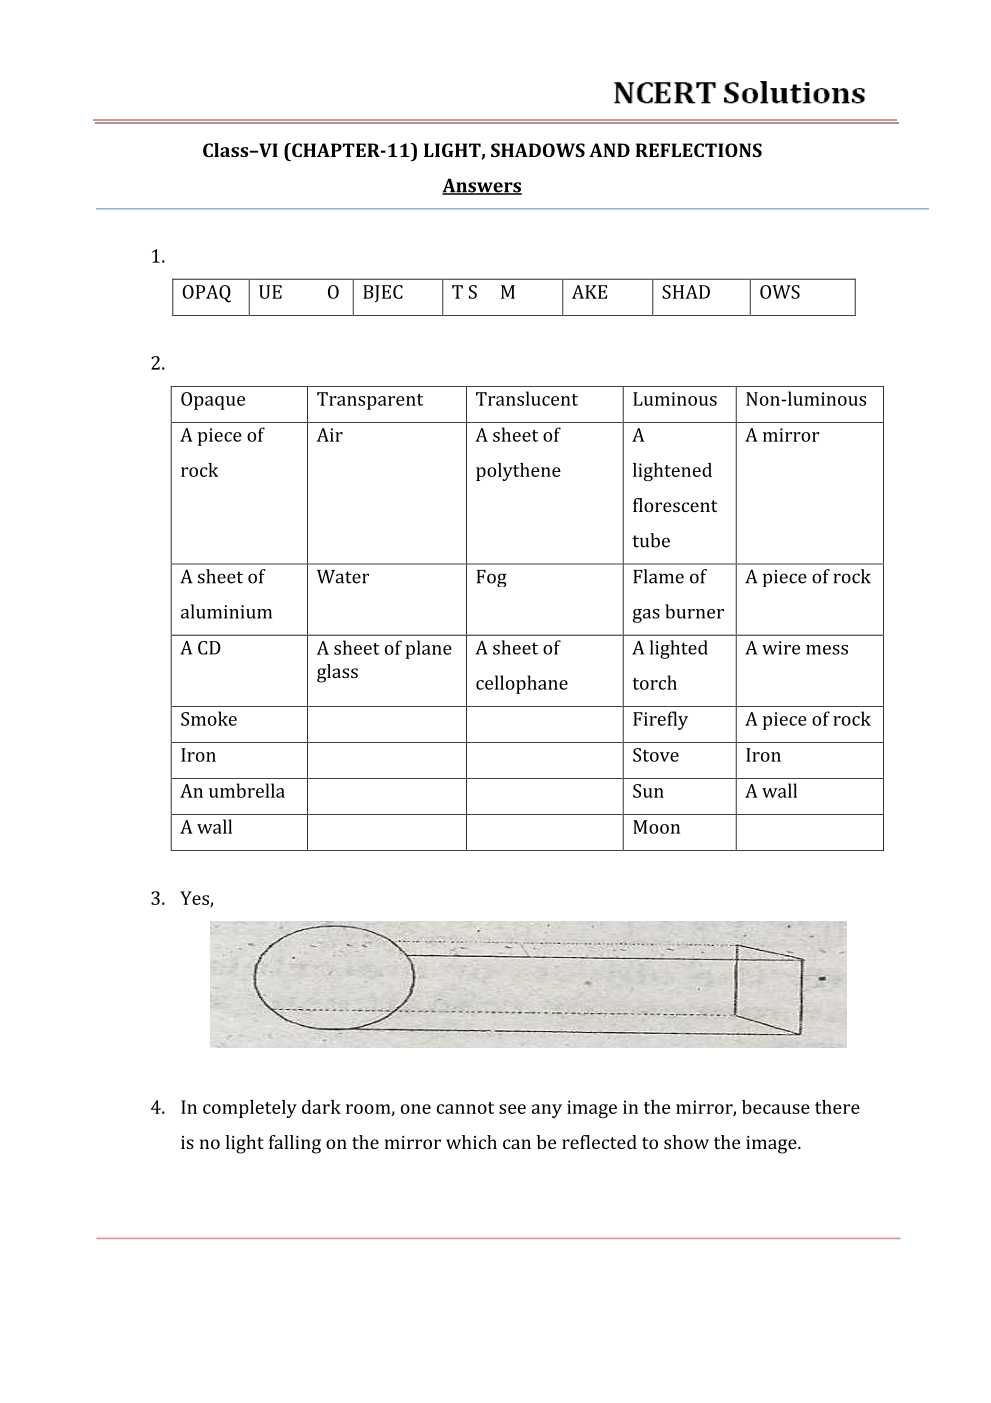 NCERT Solutions For Class 6 Science Chapter 11